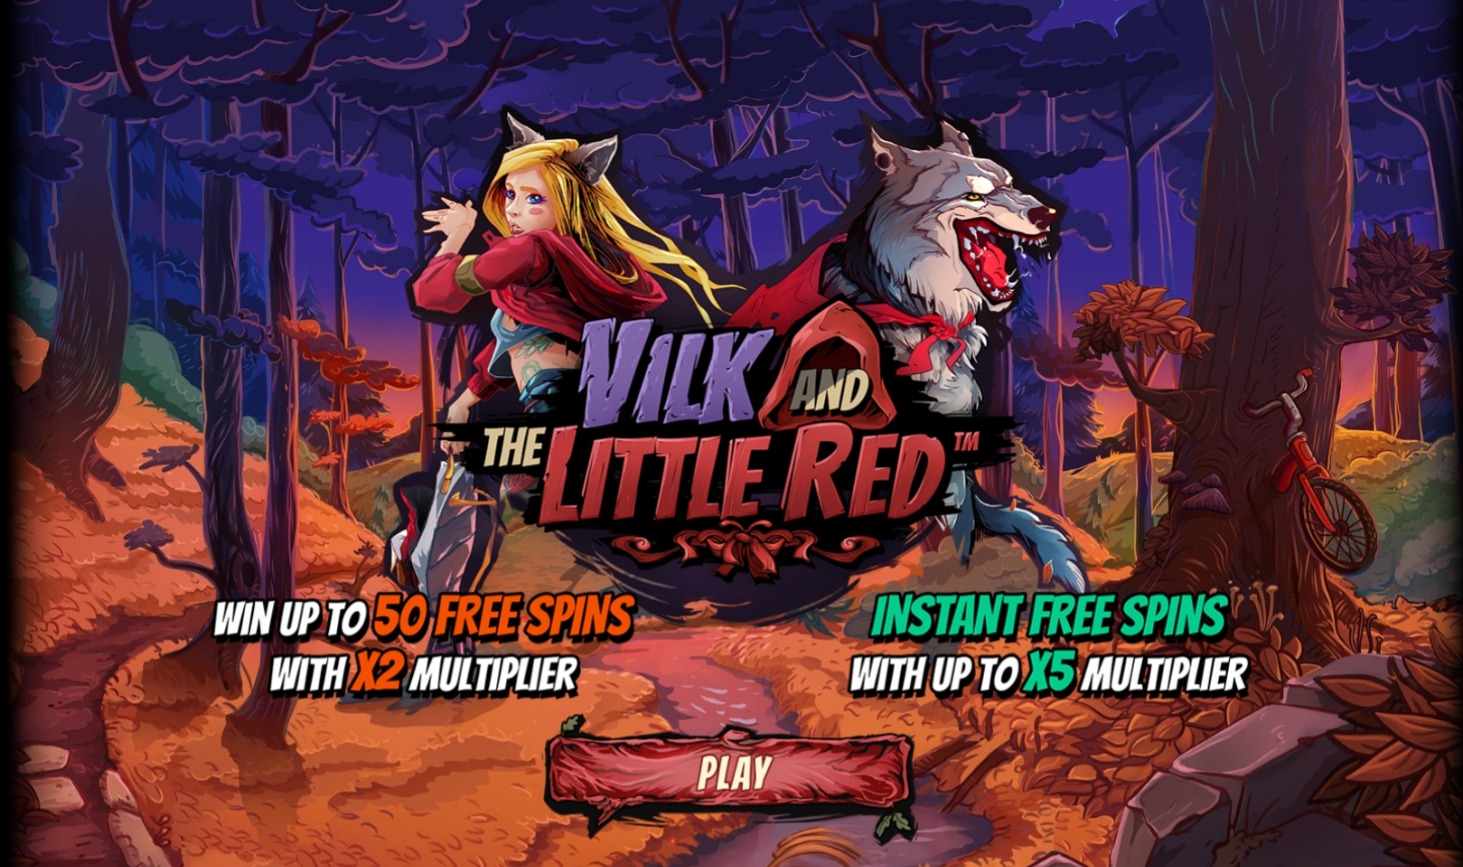 Vilk u0026 the Little Red slot by ELA Games - Gameplay + Free Spins Feature